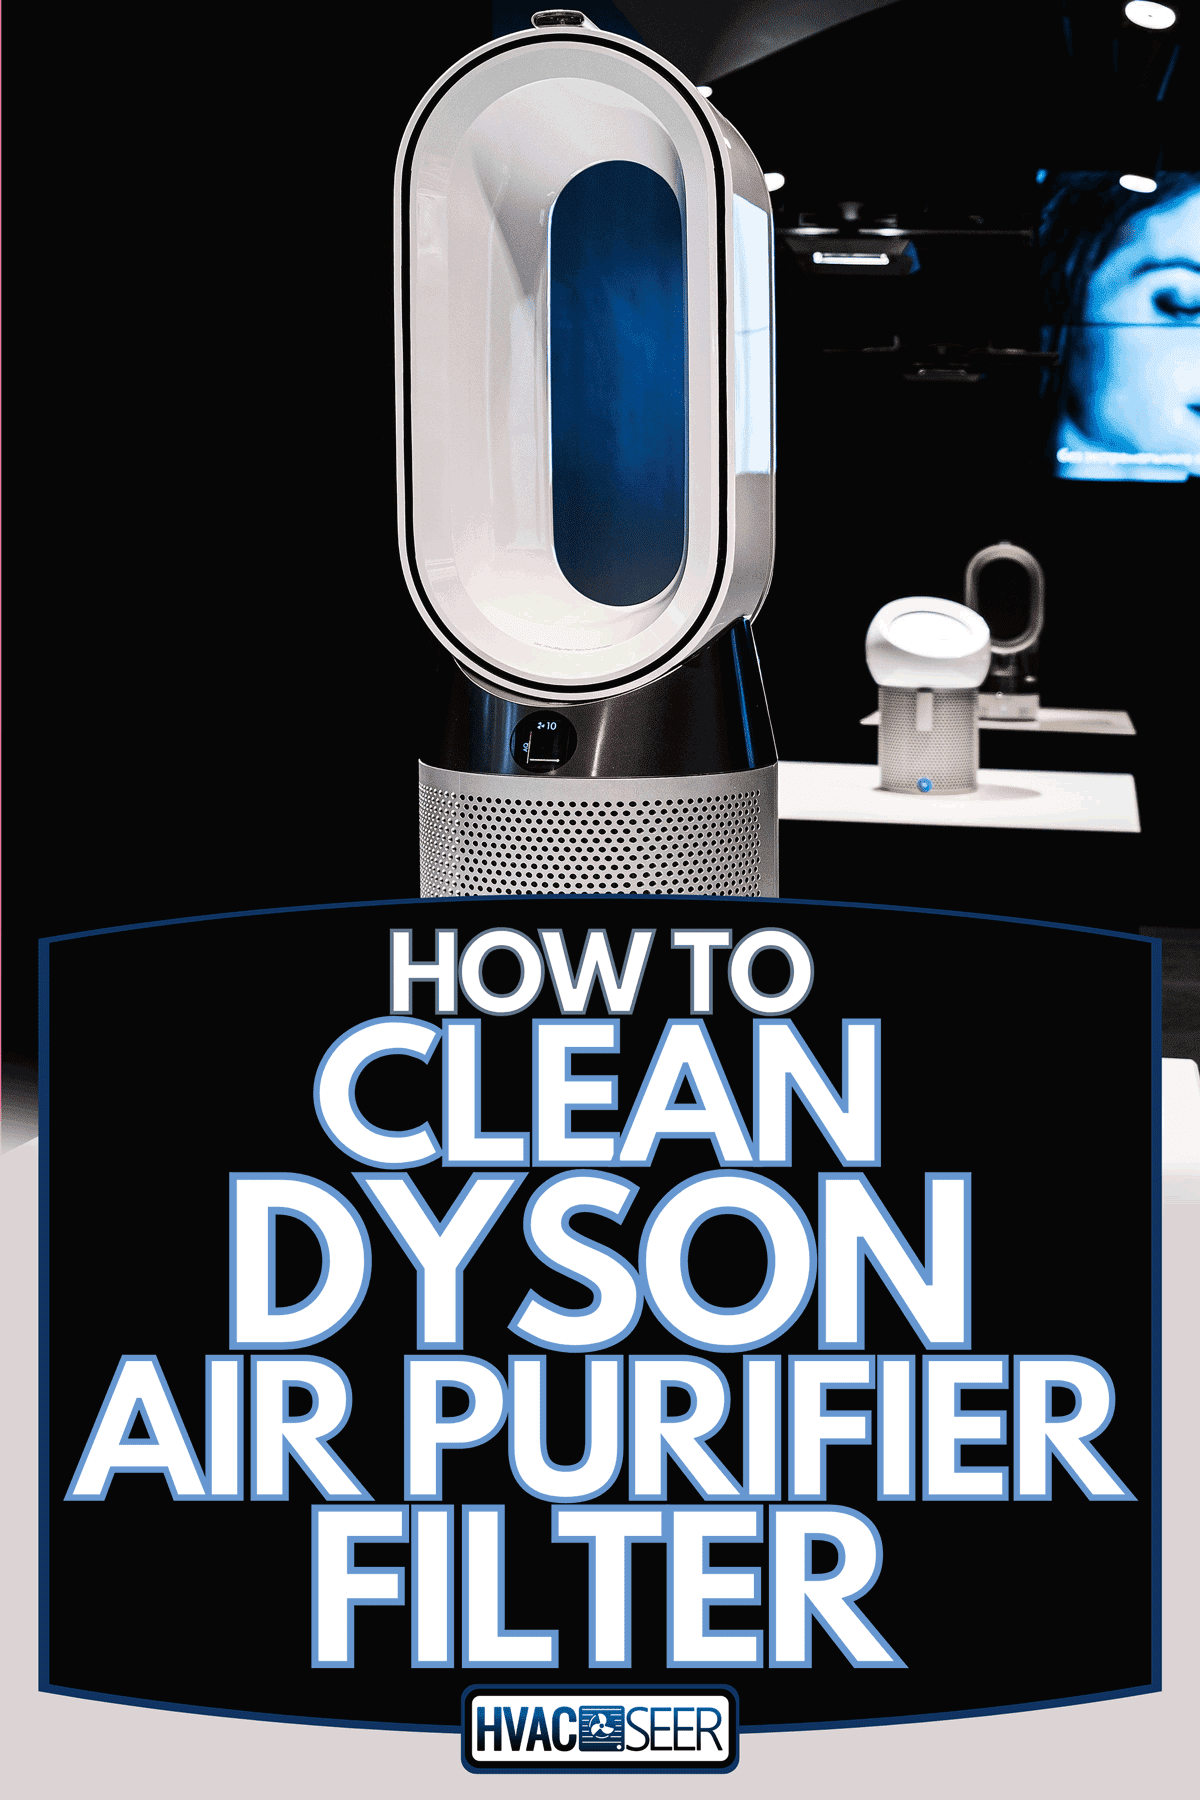 A Dyson air purifier displayed in Dyson showroom, How To Clean Dyson Air Purifier Filter